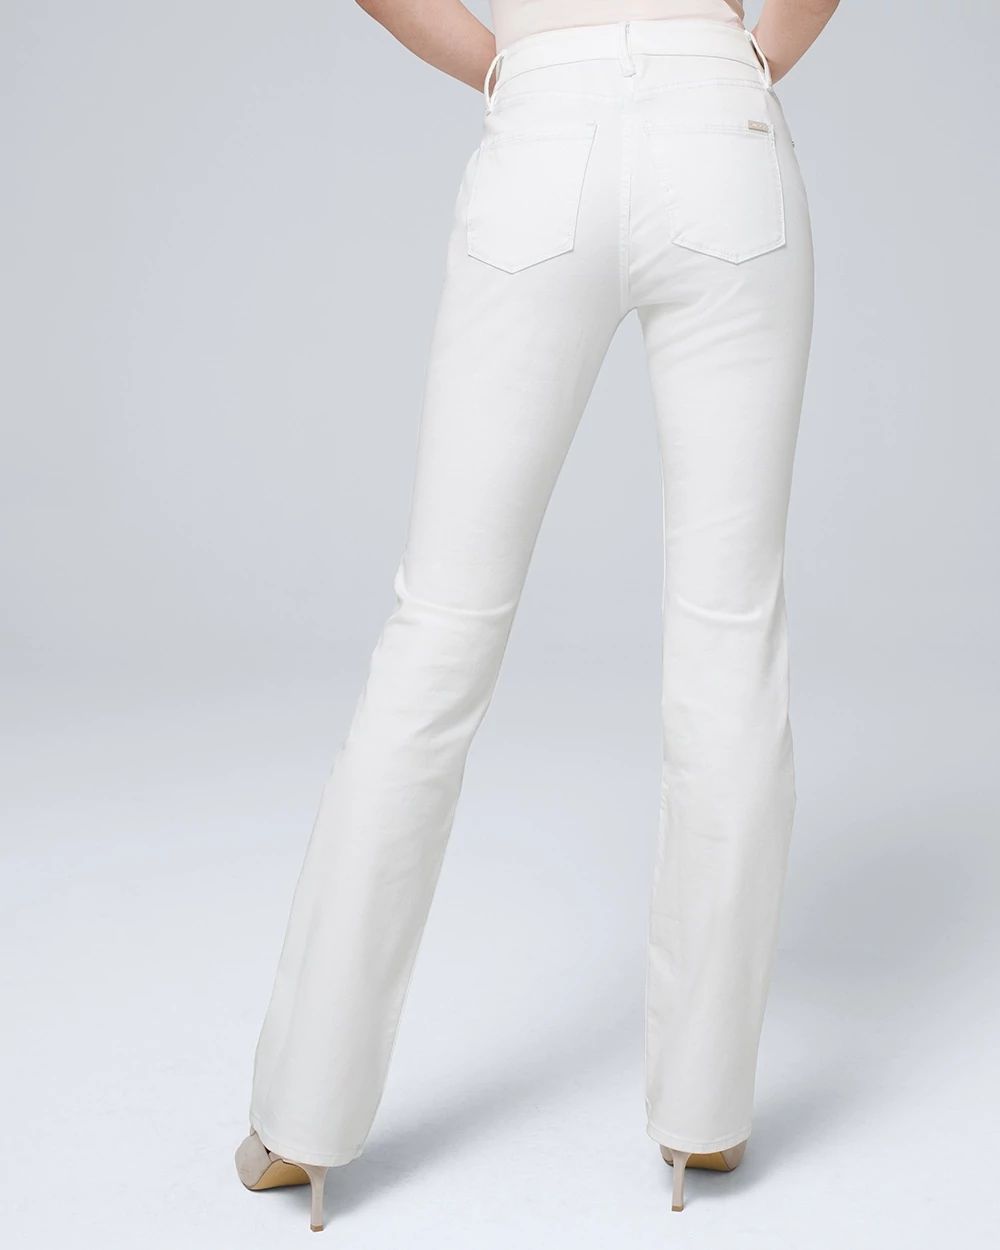 High-Rise Sculpt White Bootcut Jeans click to view larger image.